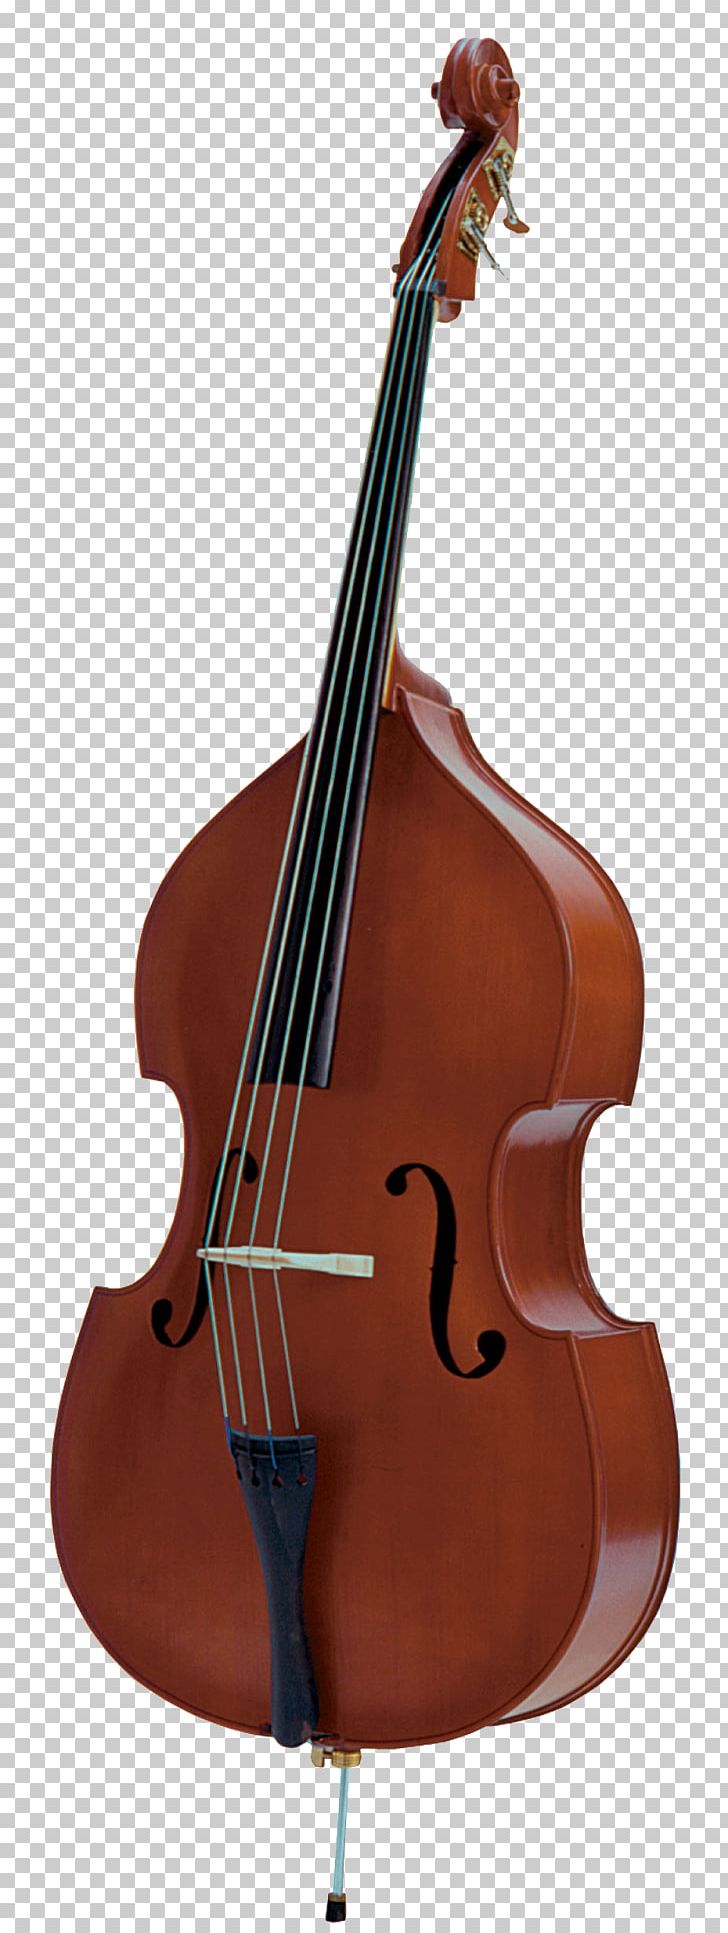 Double Bass Bass Guitar String Instruments Electric Upright Bass Musical Instruments PNG, Clipart, Acoustic Bass Guitar, Acoustic Guitar, Bass, Bass Violin, Bow Free PNG Download